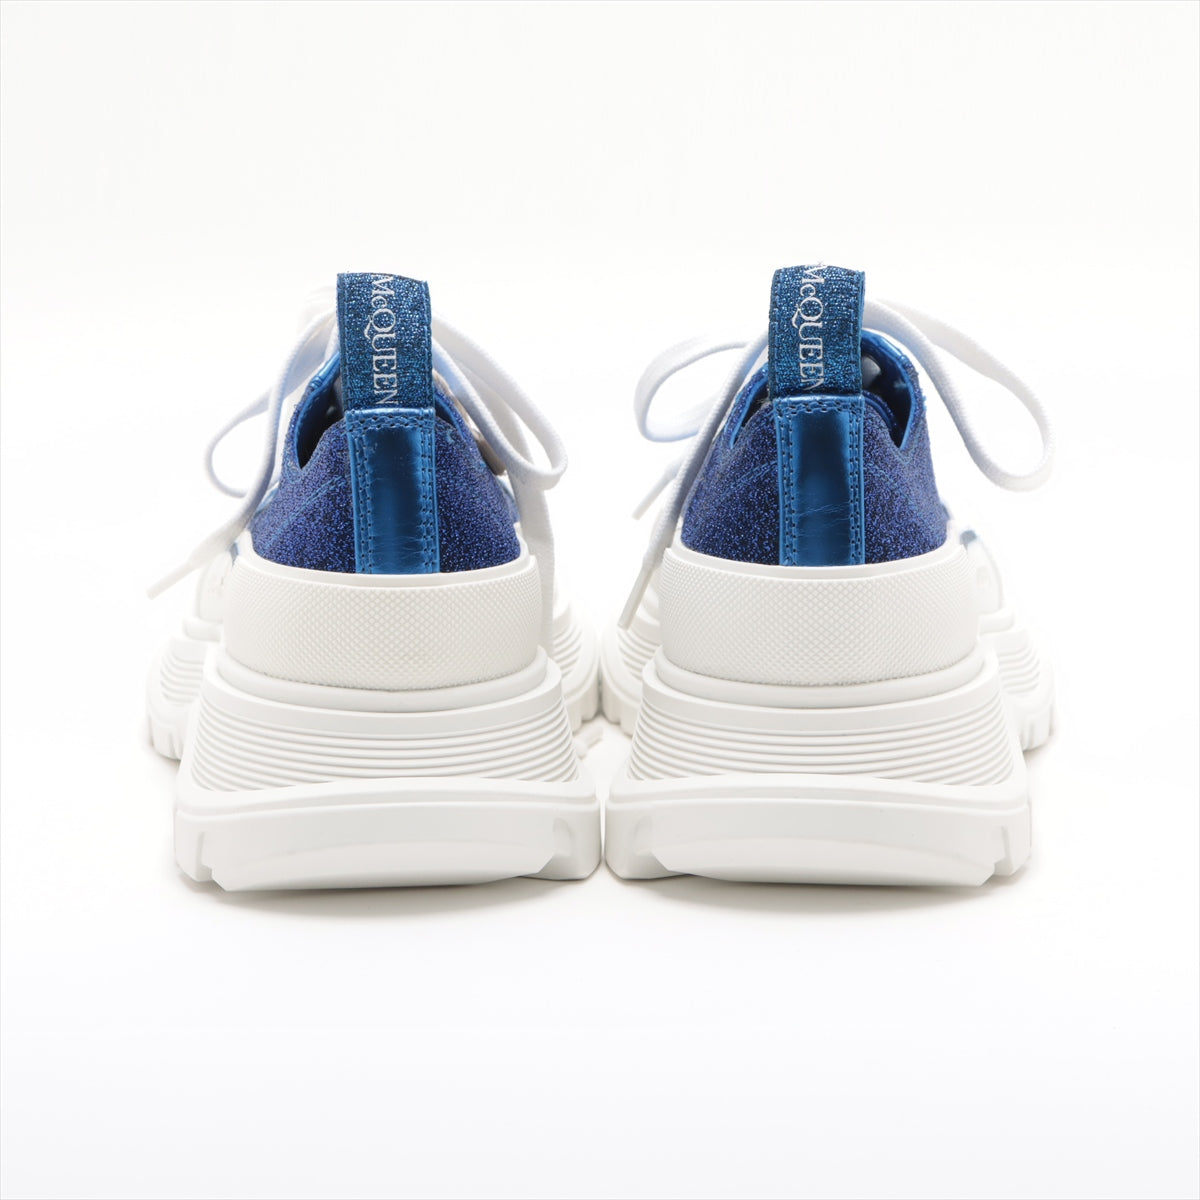 Alexander McQueen Fabric Sneakers 37 Ladies' Blue x white 685707 Glitter Is there a replacement string